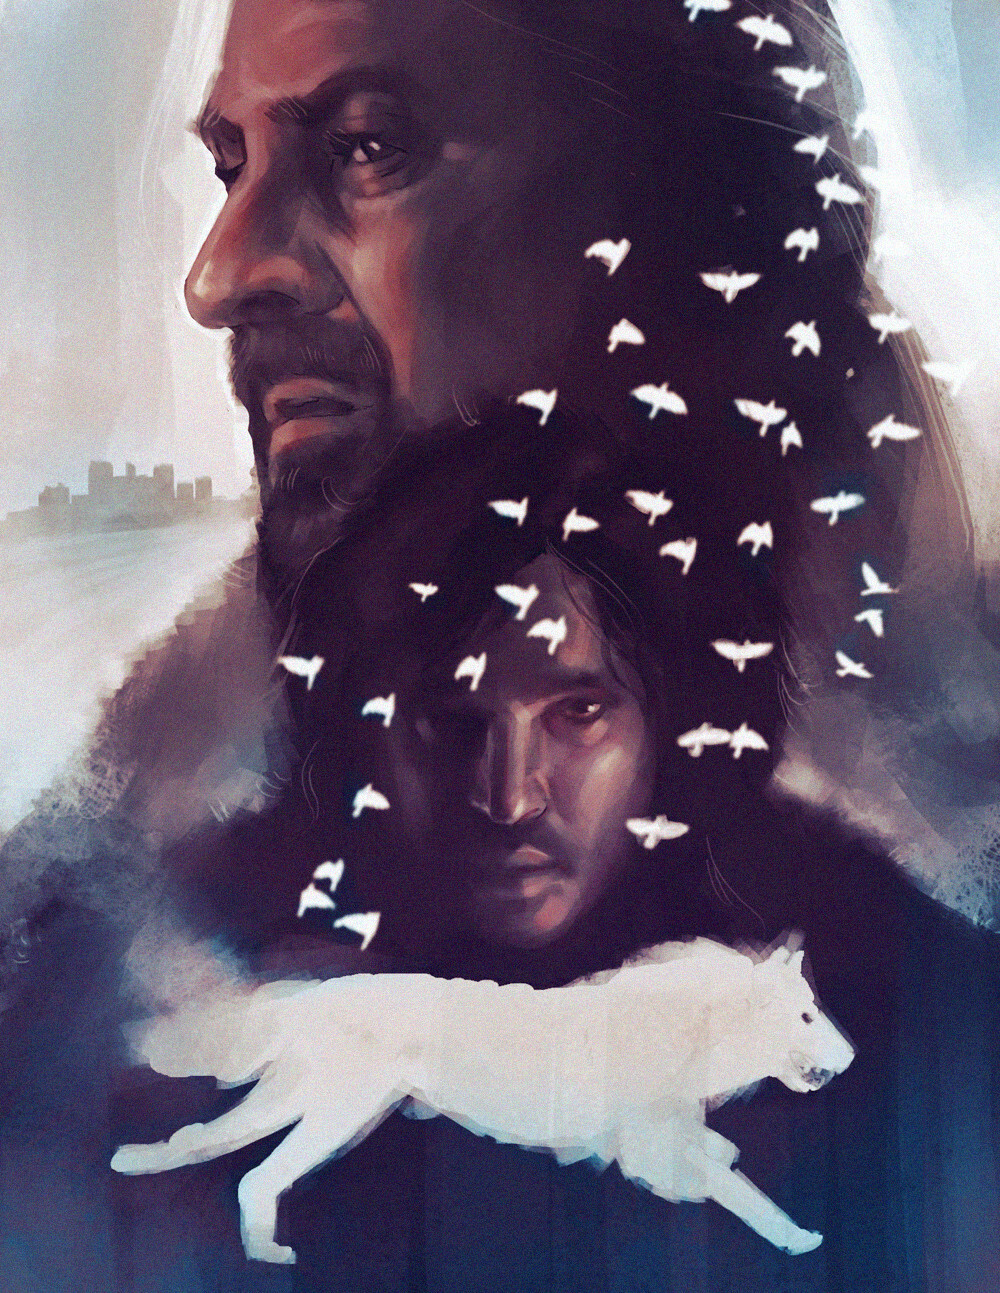 "Jon and Ned"
Game of Thrones fan art.